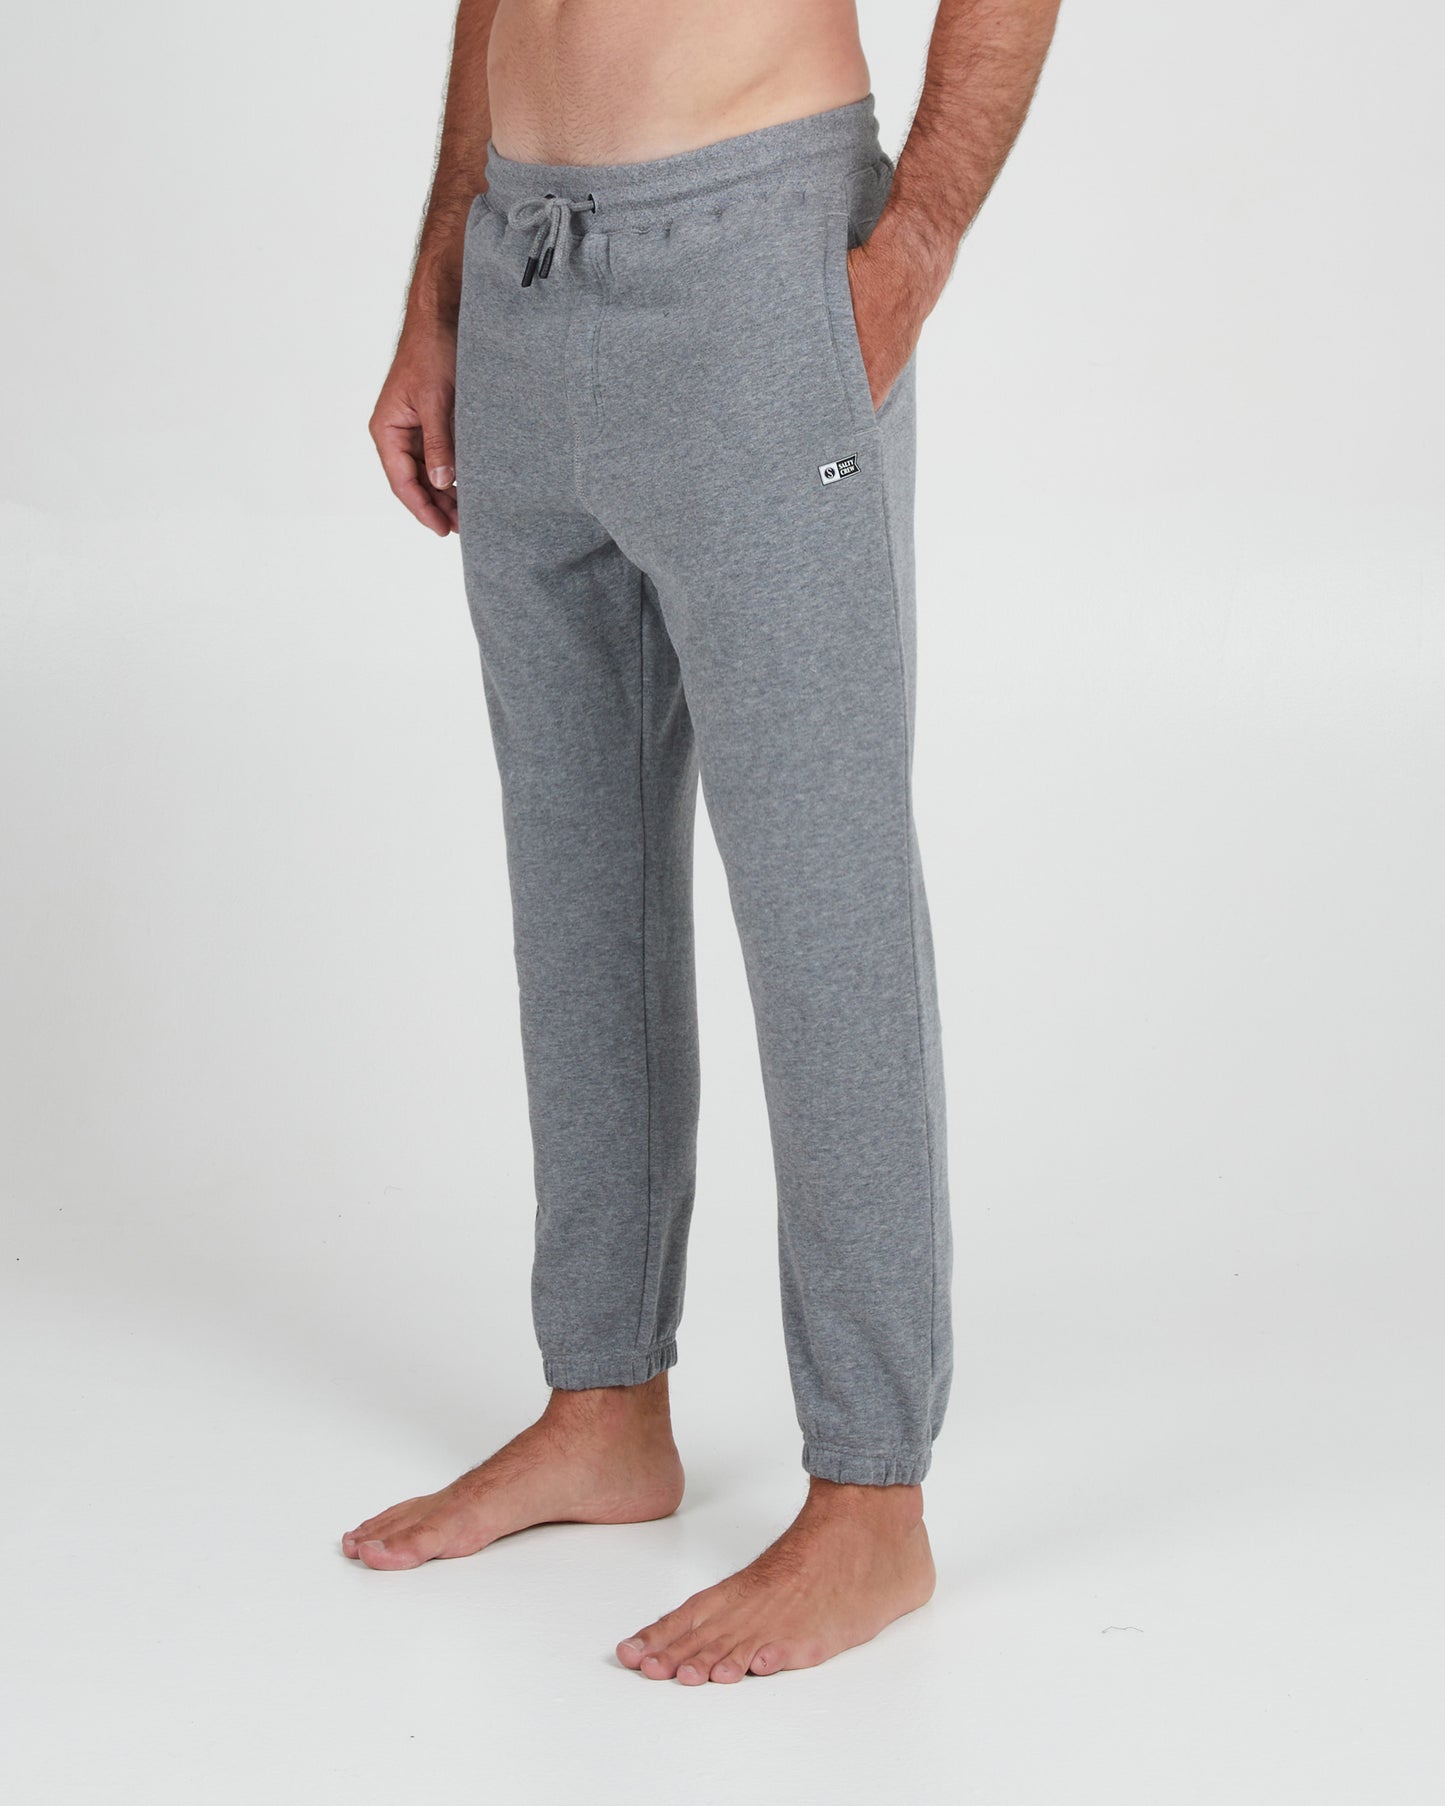 On body front angle of the Dockside Grey/Heather Sweatpant